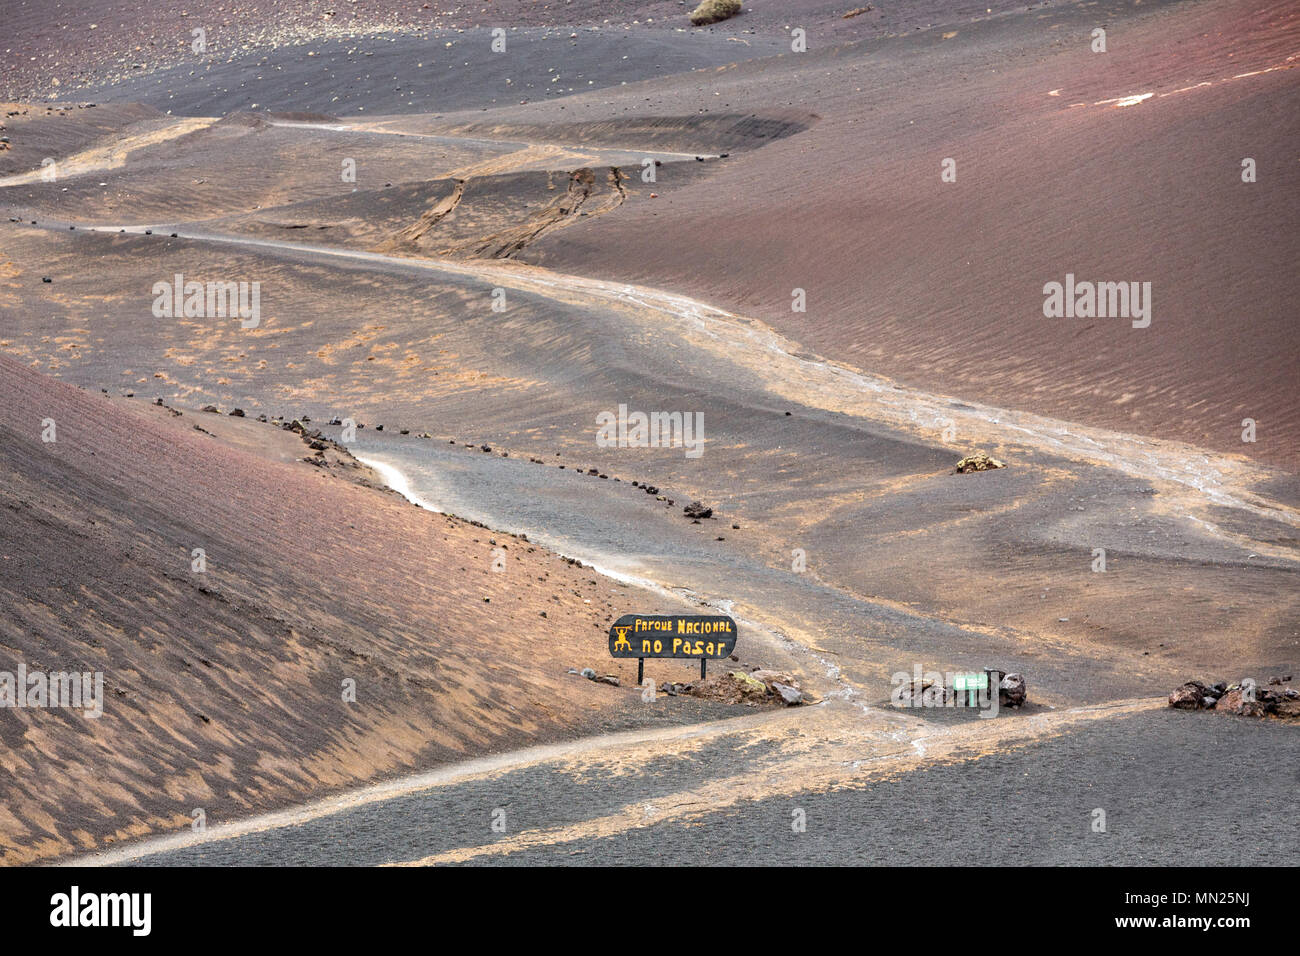 LANZAROTE, CANARY ISLANDS, SPAIN: Dry and rocky landscape in the volcanis national park Timanfaya. Stock Photo